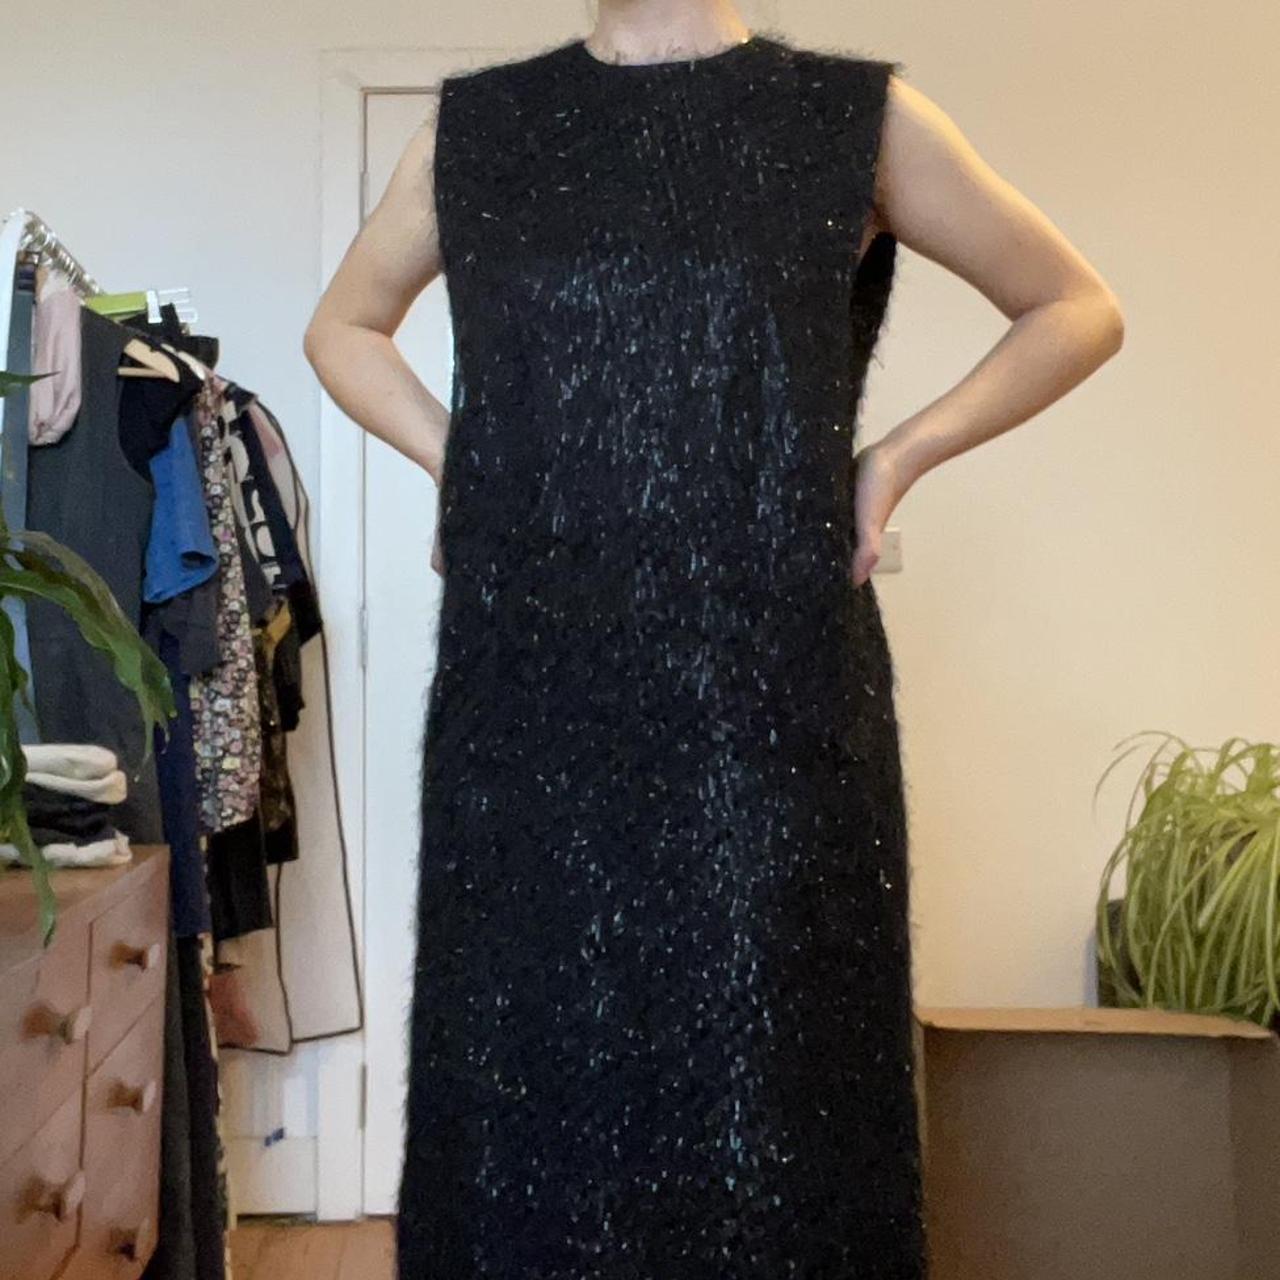 dress in sparkles: black and corduroy